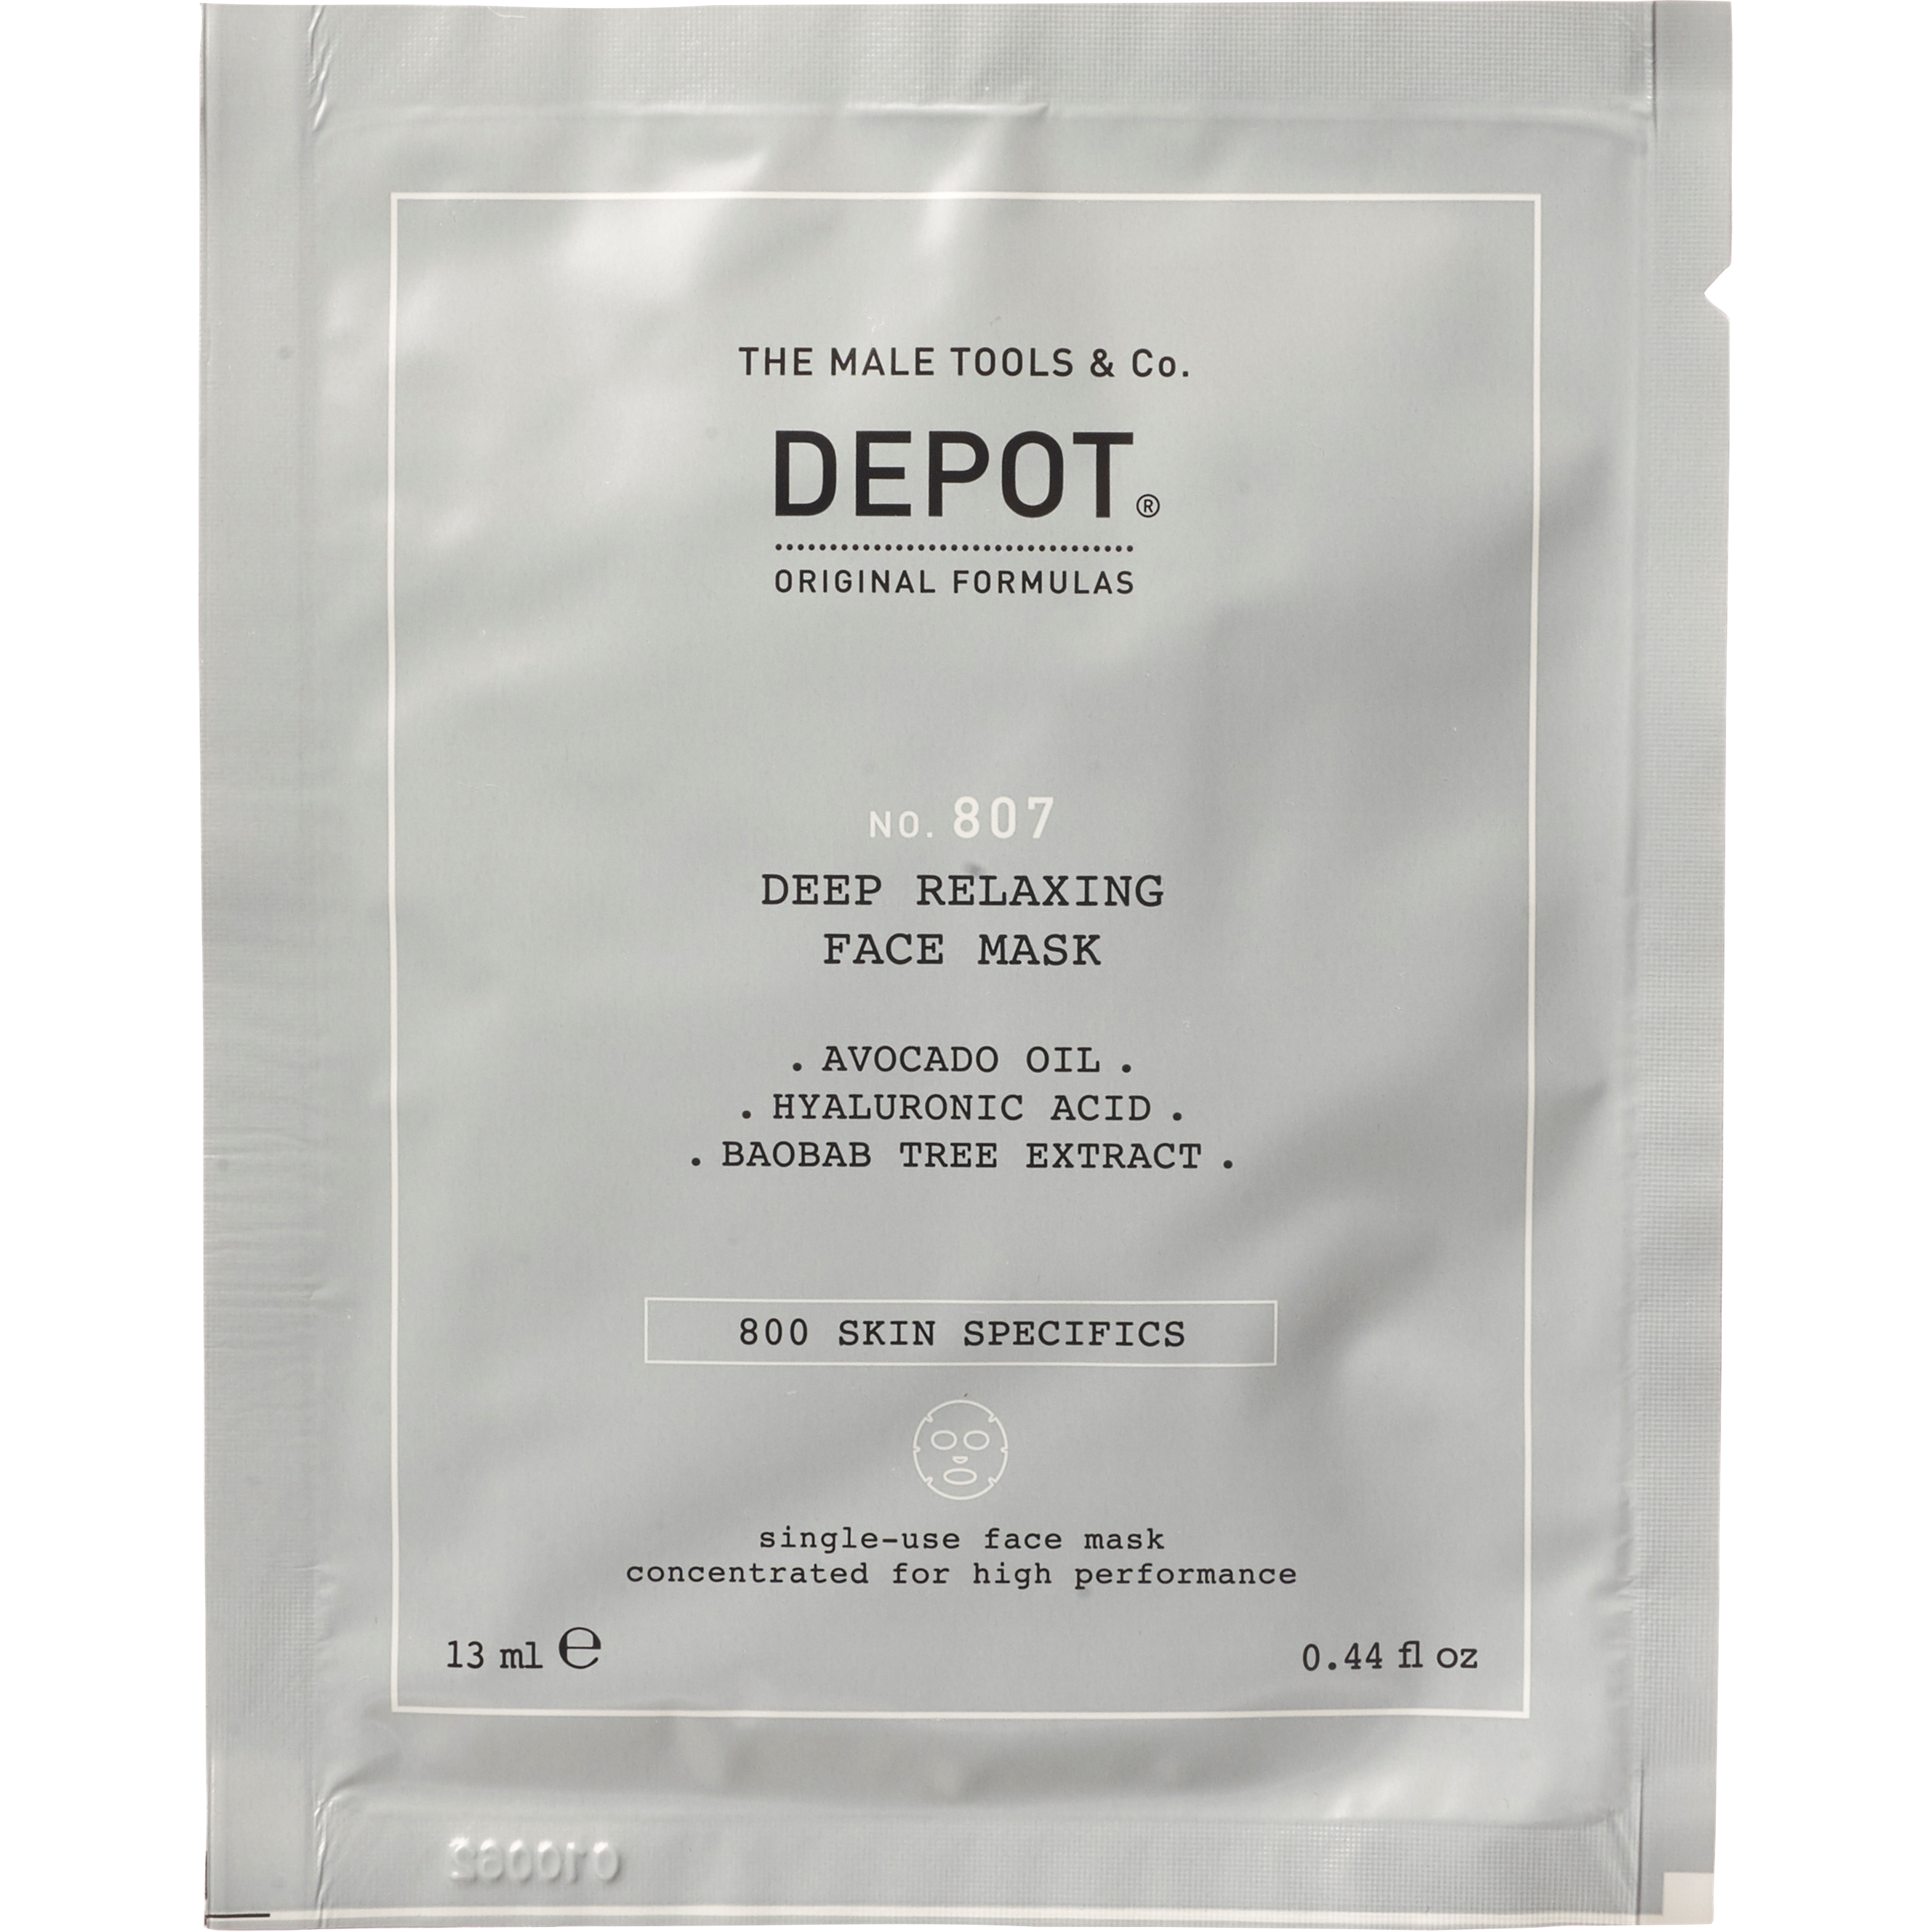 DEPOT MALE TOOLS No. 807 Deep Relaxing Face Mask